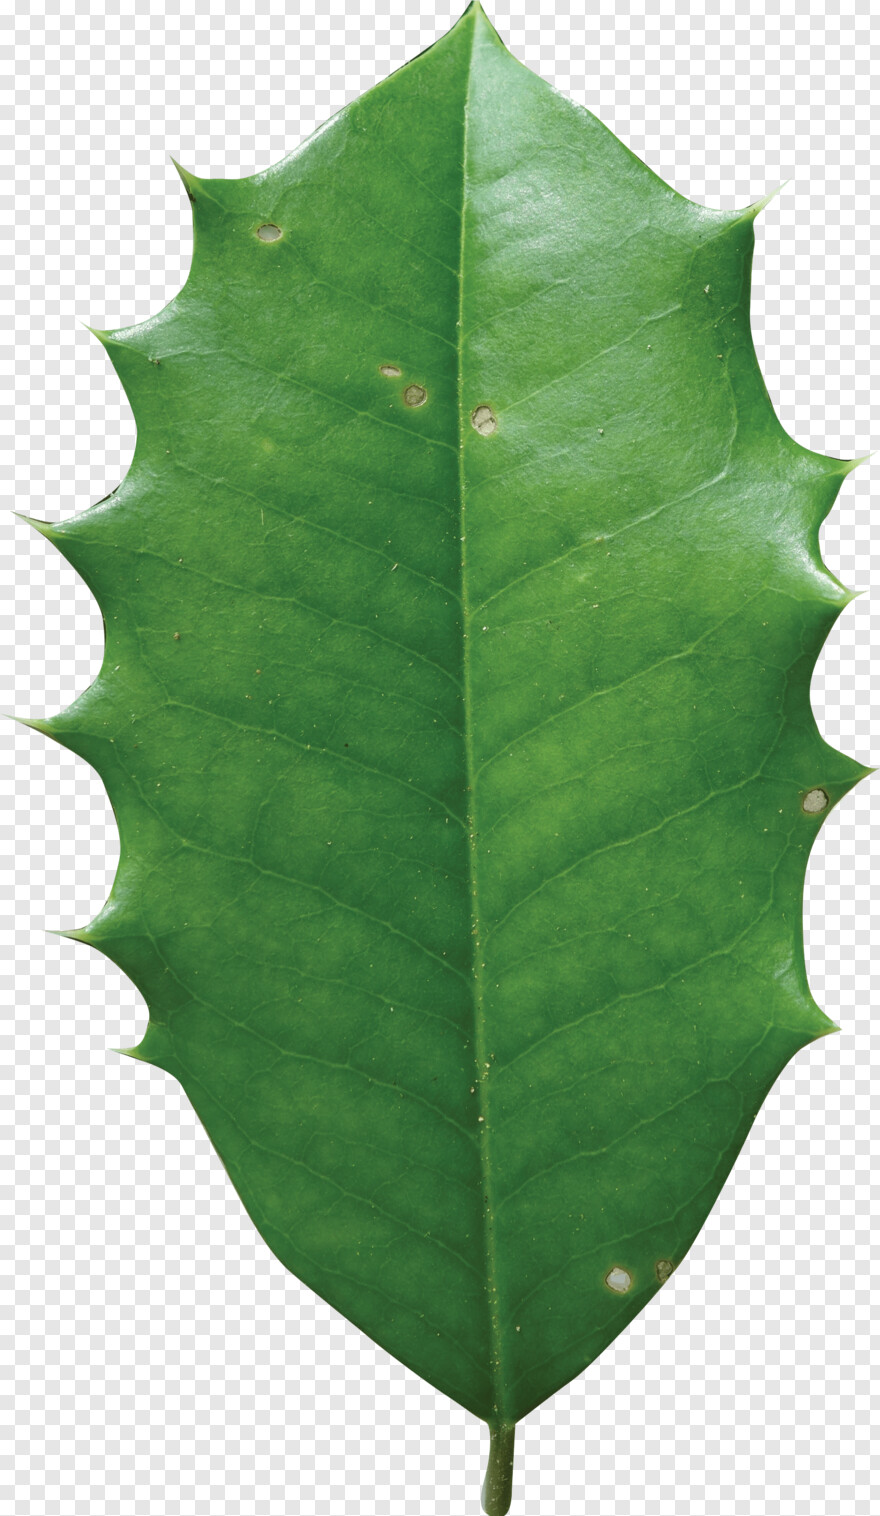 holly-leaves # 761267